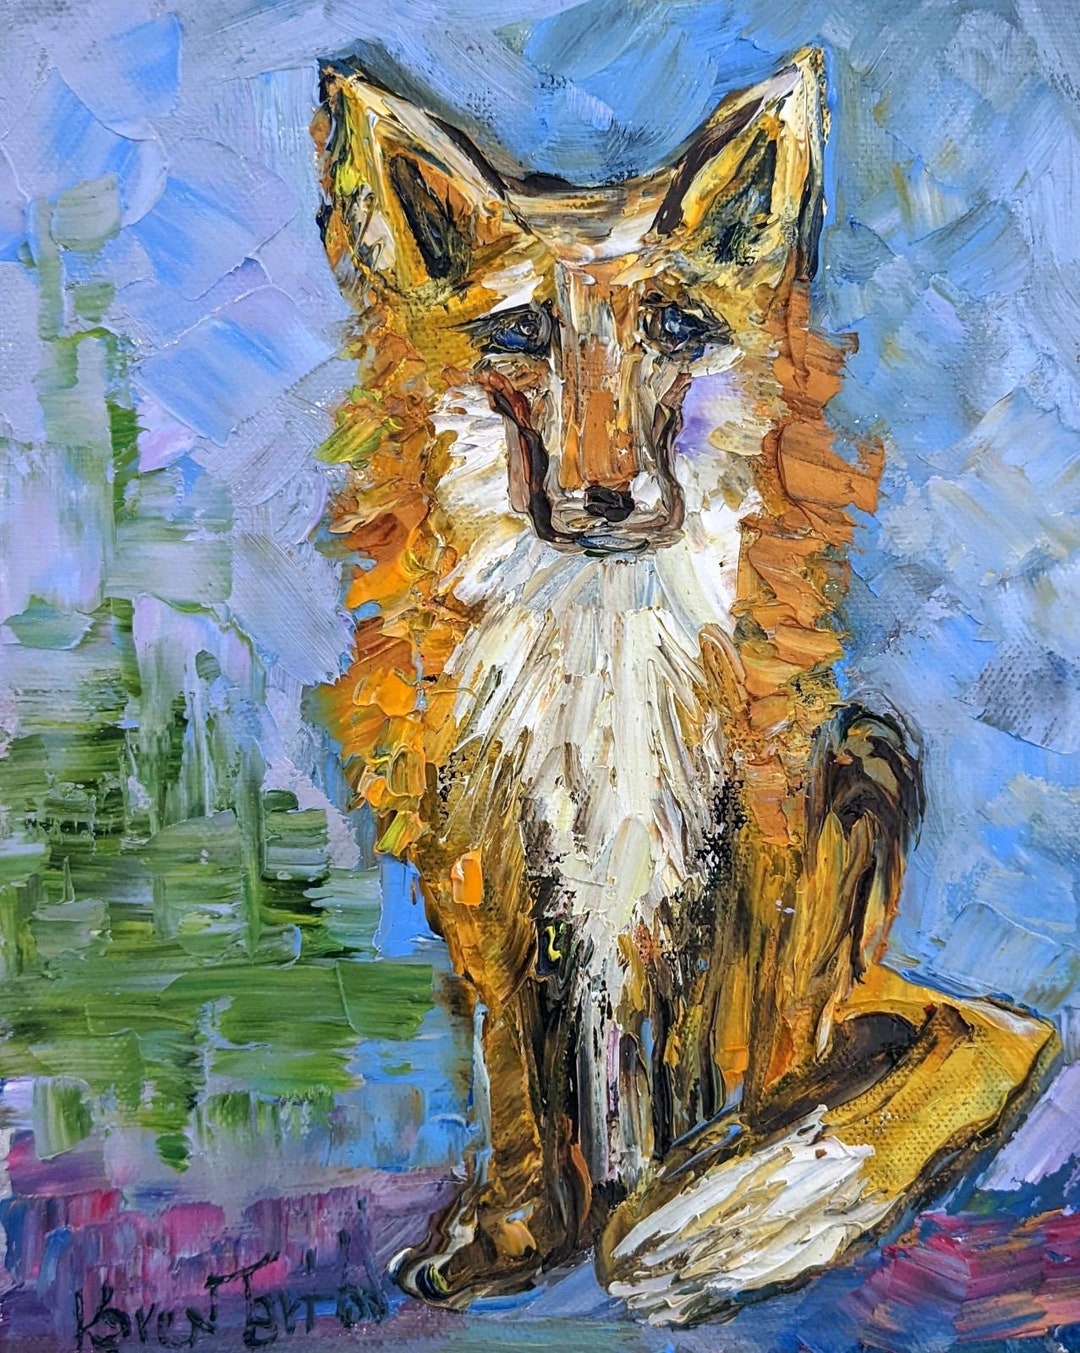 How to use a suitable oil paint thinner - Painting Fox